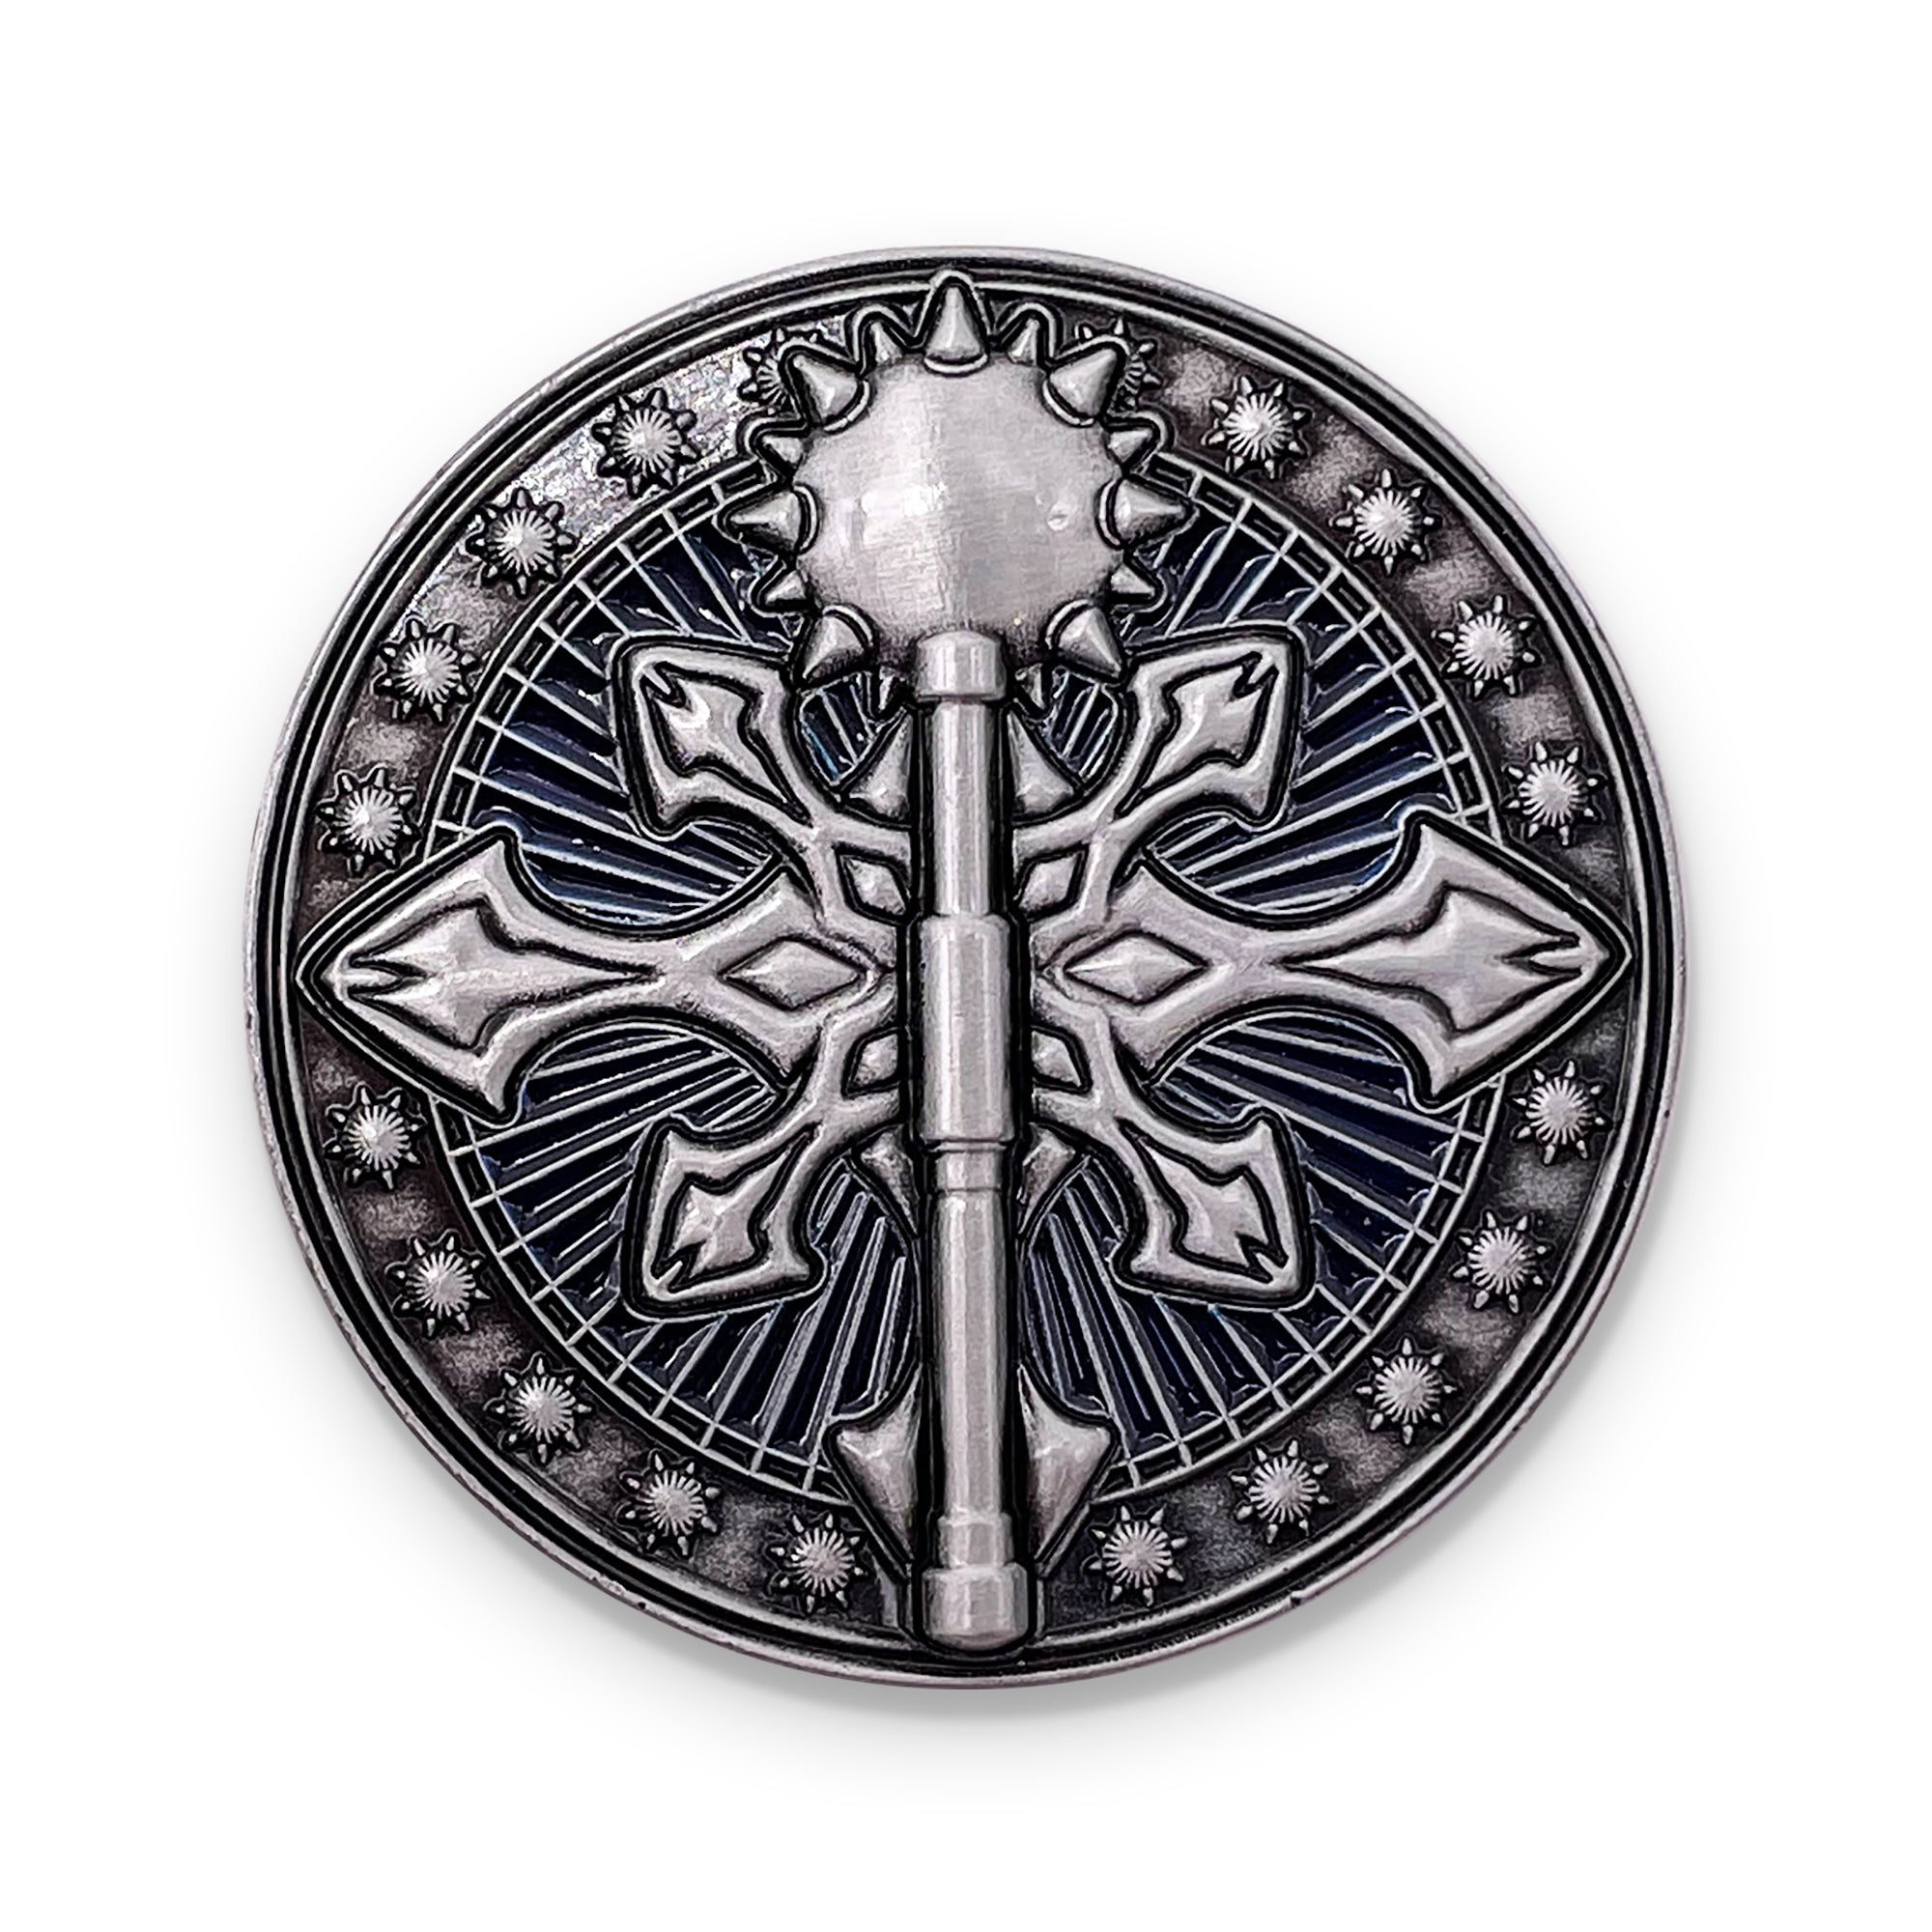 Profession Coins - Cleric Metal Coins Set of 10